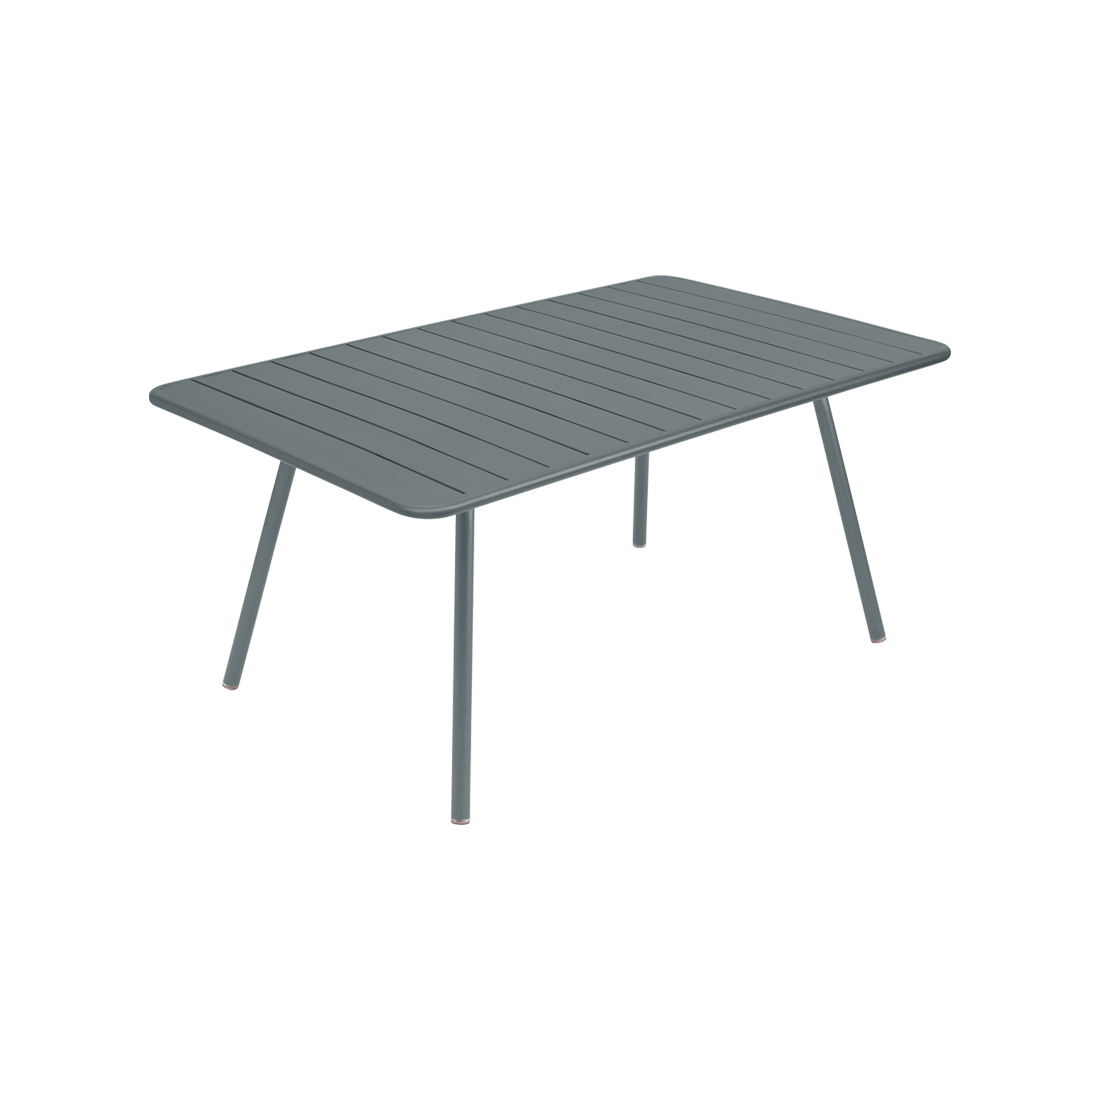 FERMOB Luxembourg Outdoor Dining Table [165 x 100 cm]